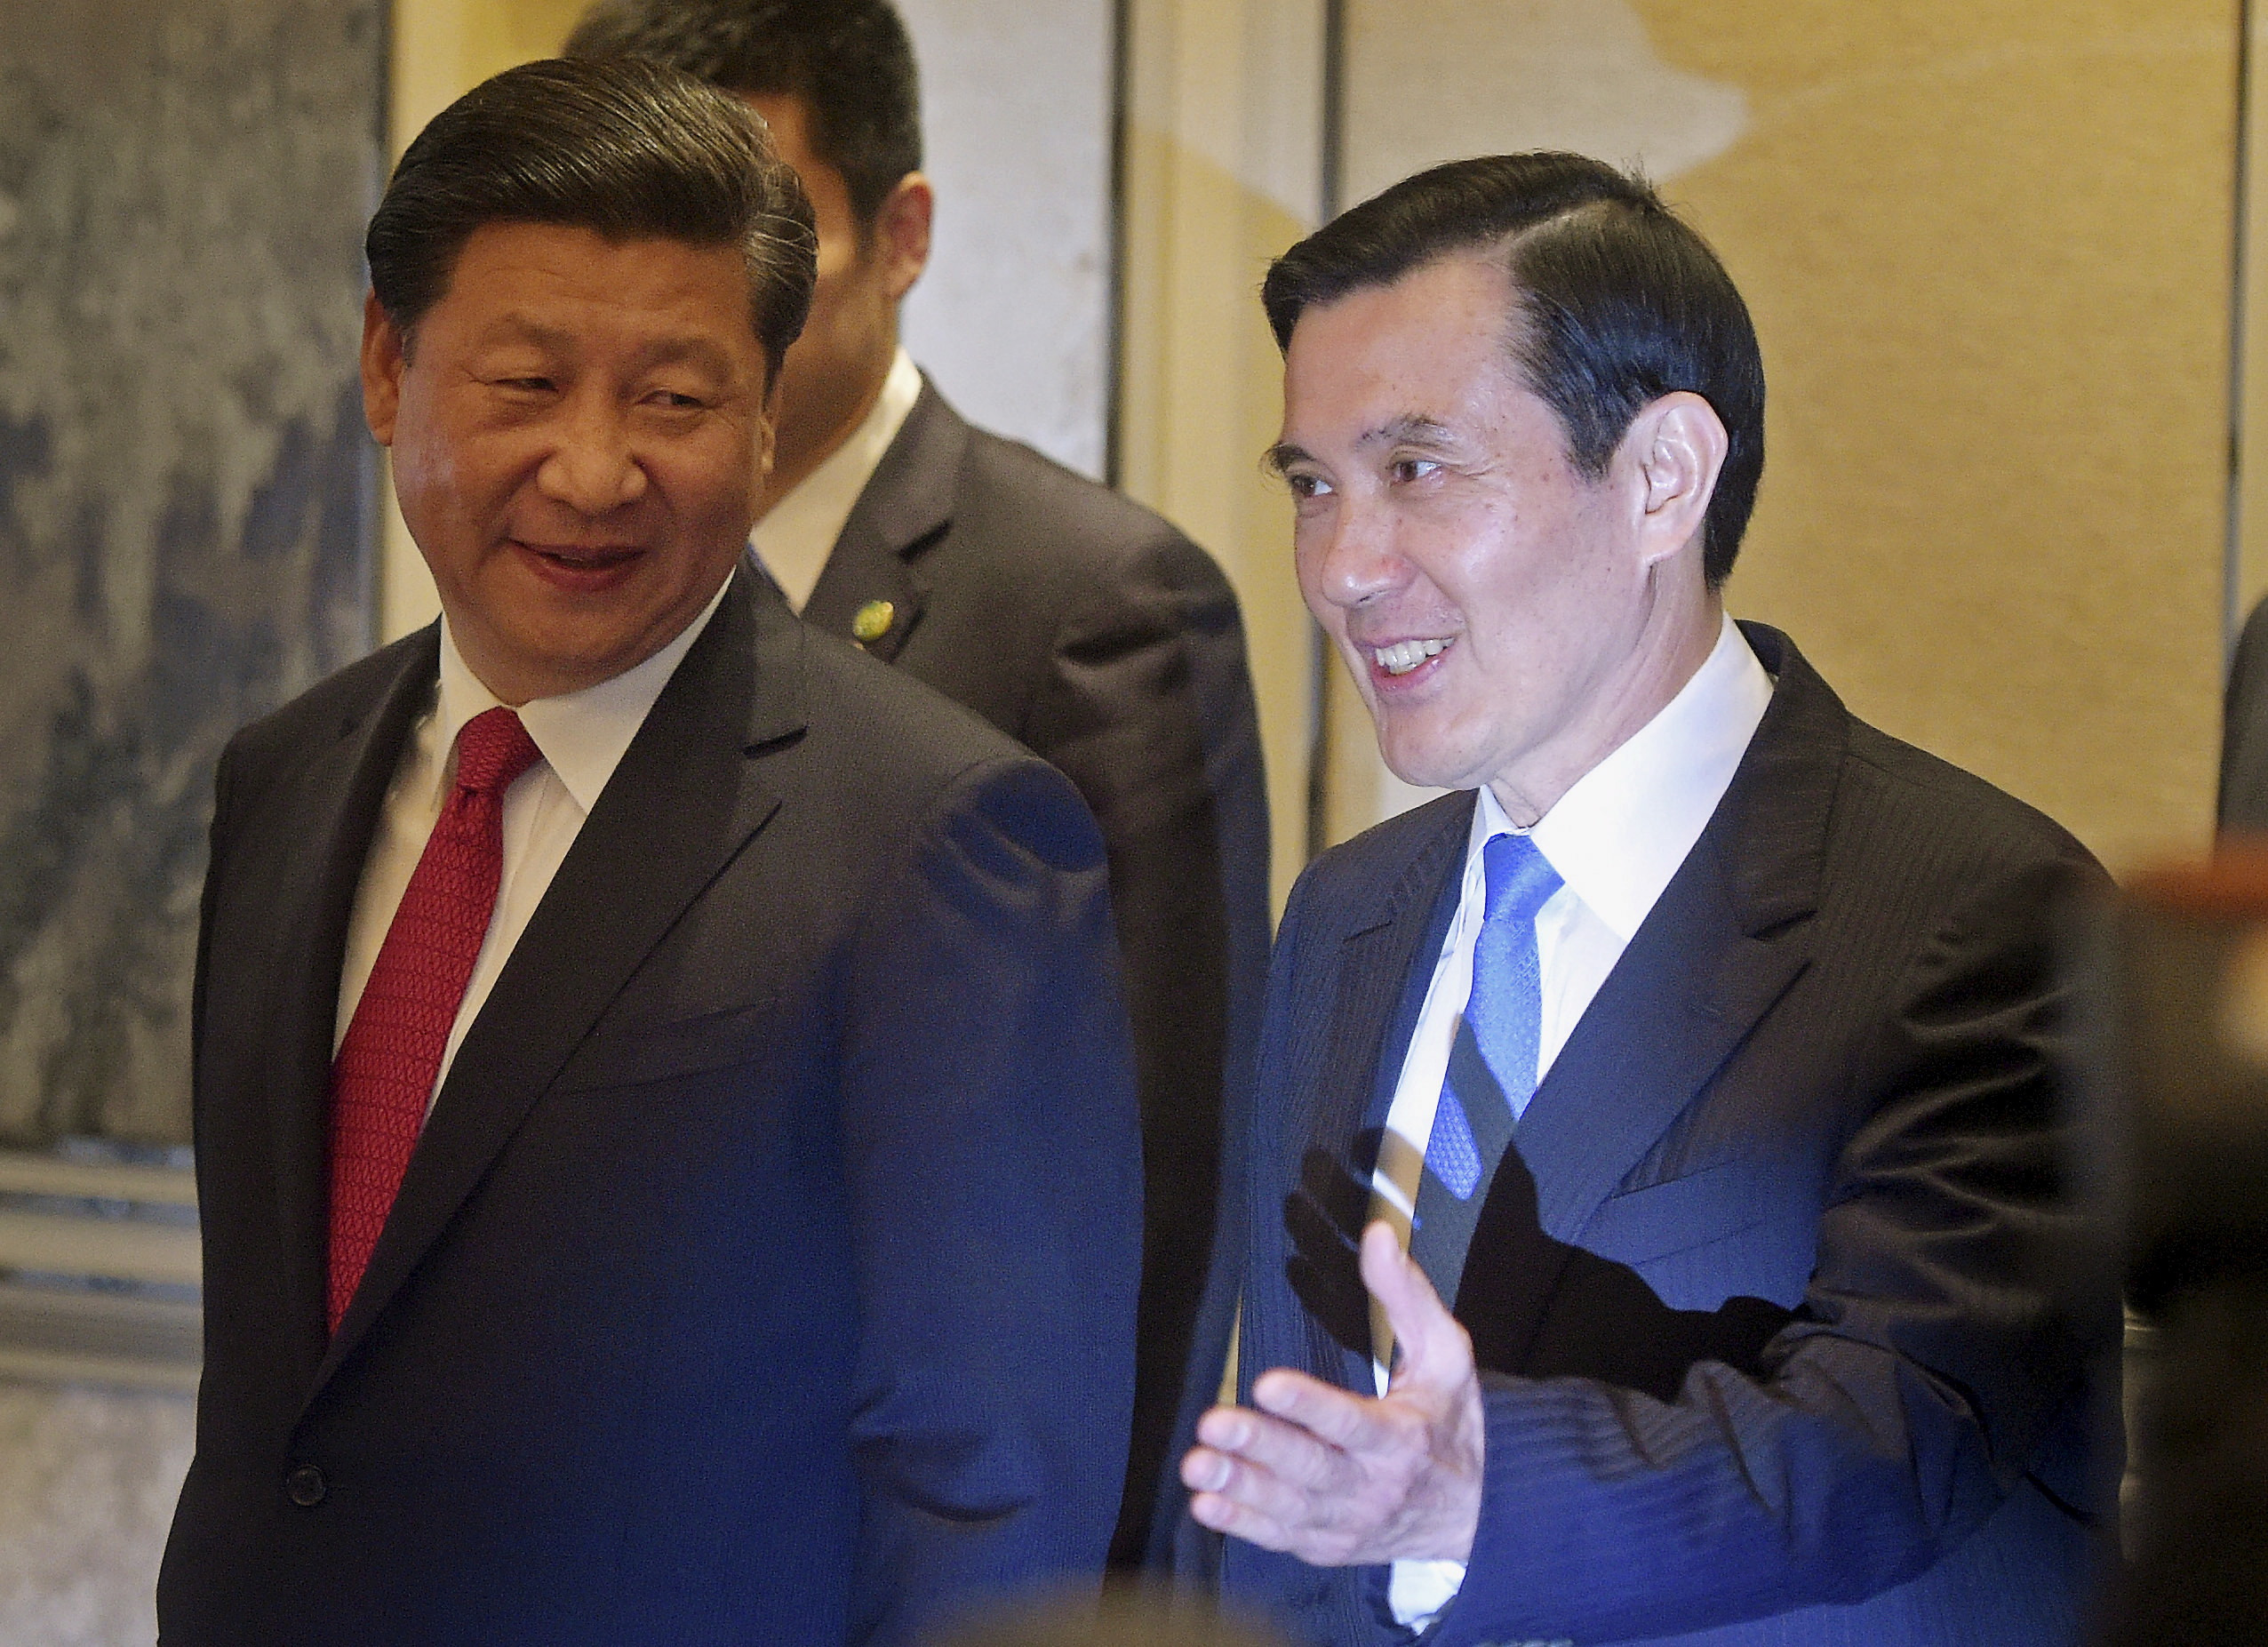 Chinese President Xi Jinping and then Taiwanese President Ma Ying-jeou smile as they enter the room at the Shangri-la Hotel where they are to meet, in Singapore